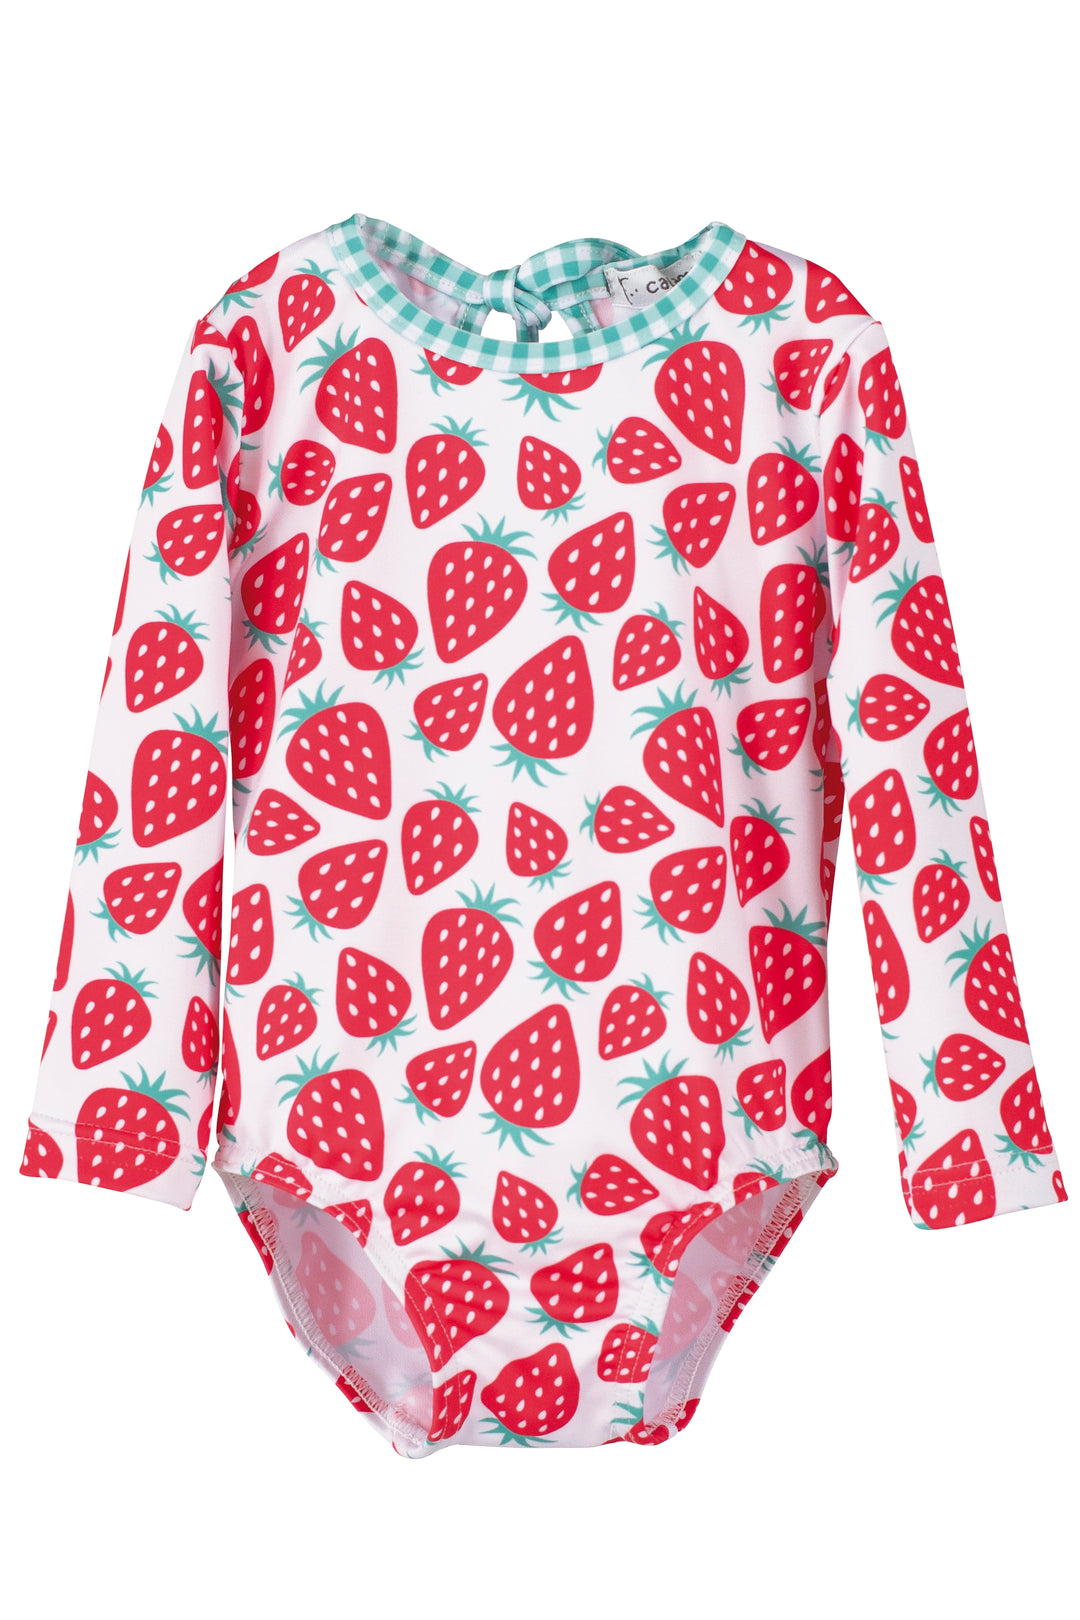 Calamaro PREORDER "Sienna" Strawberry Long Sleeve Swimsuit | Millie and John